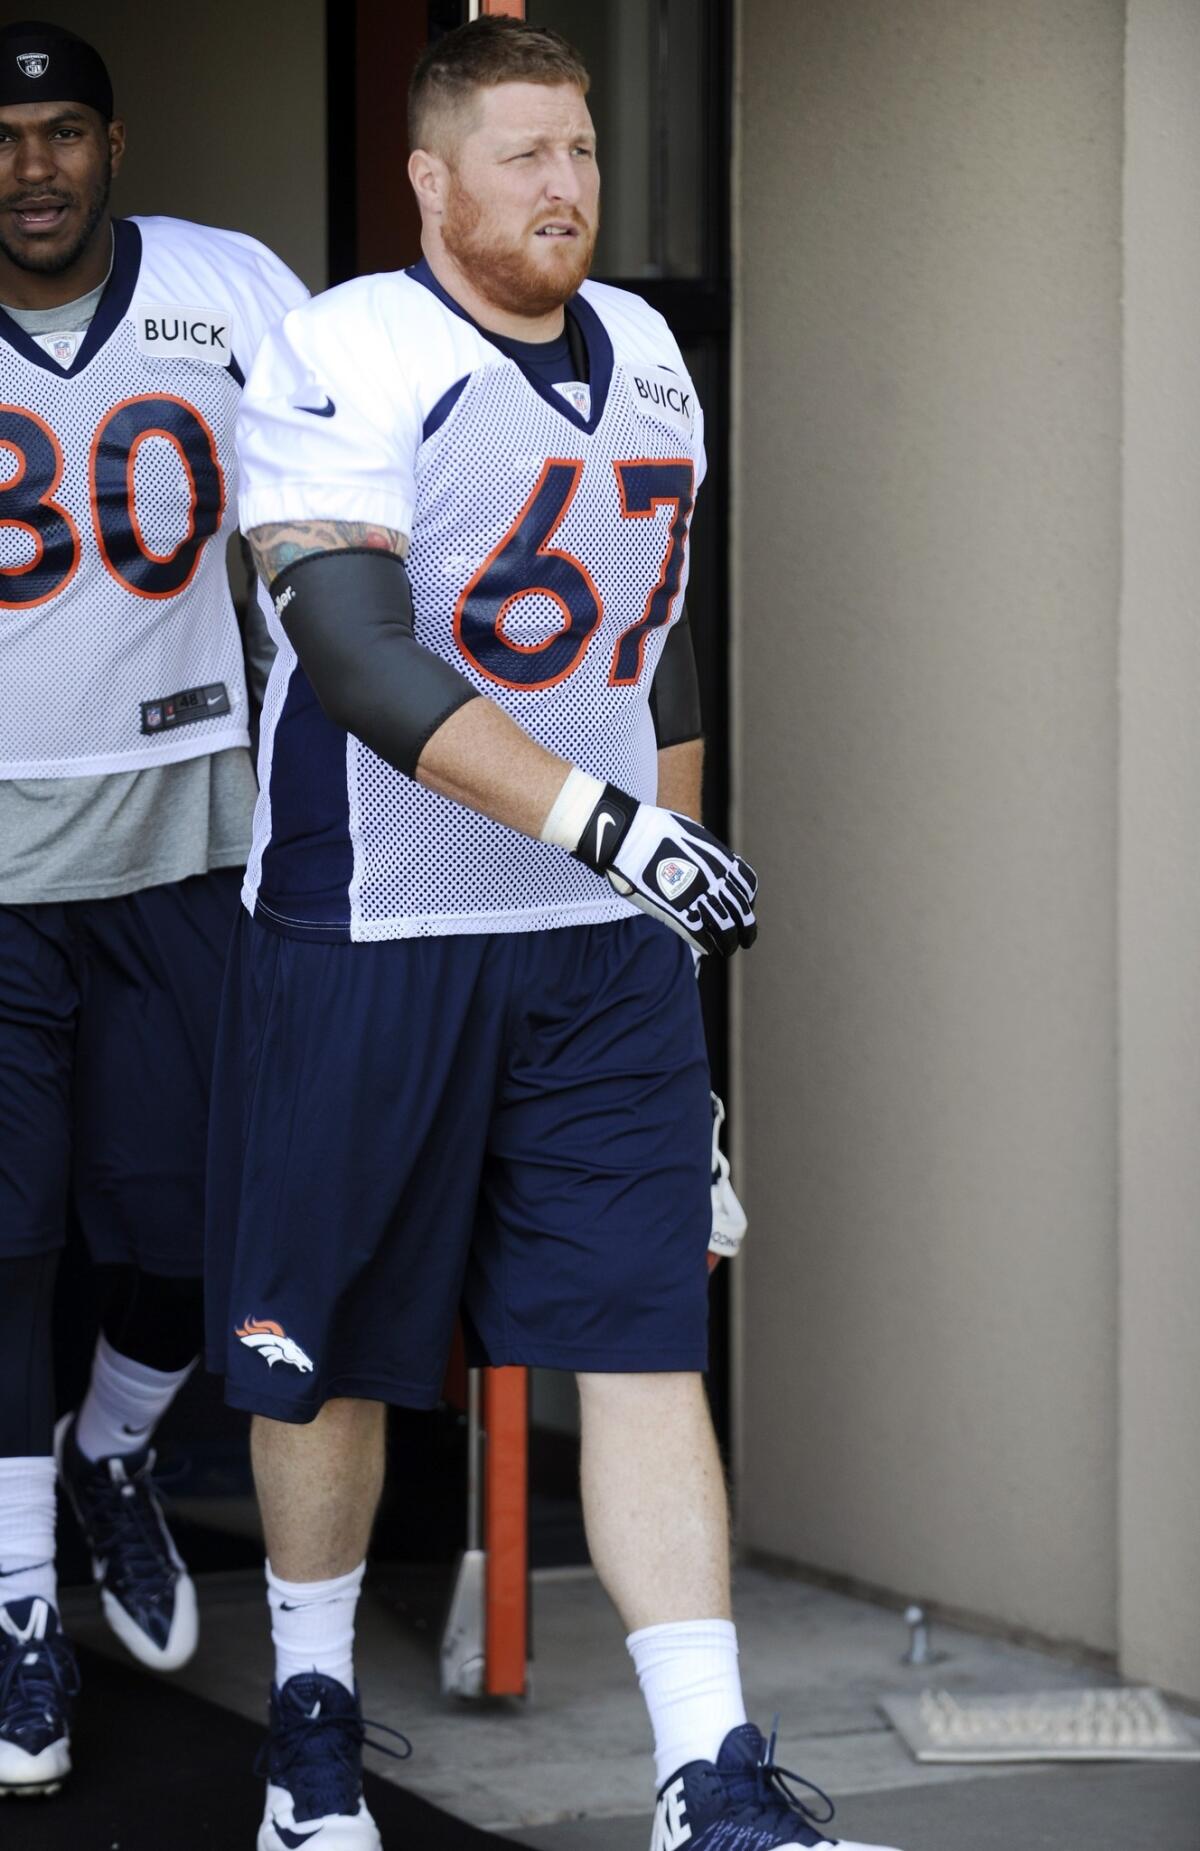 Denver Broncos center Dan Koppen will miss the 2013 season after tearing his ACL during a drill on Sunday.